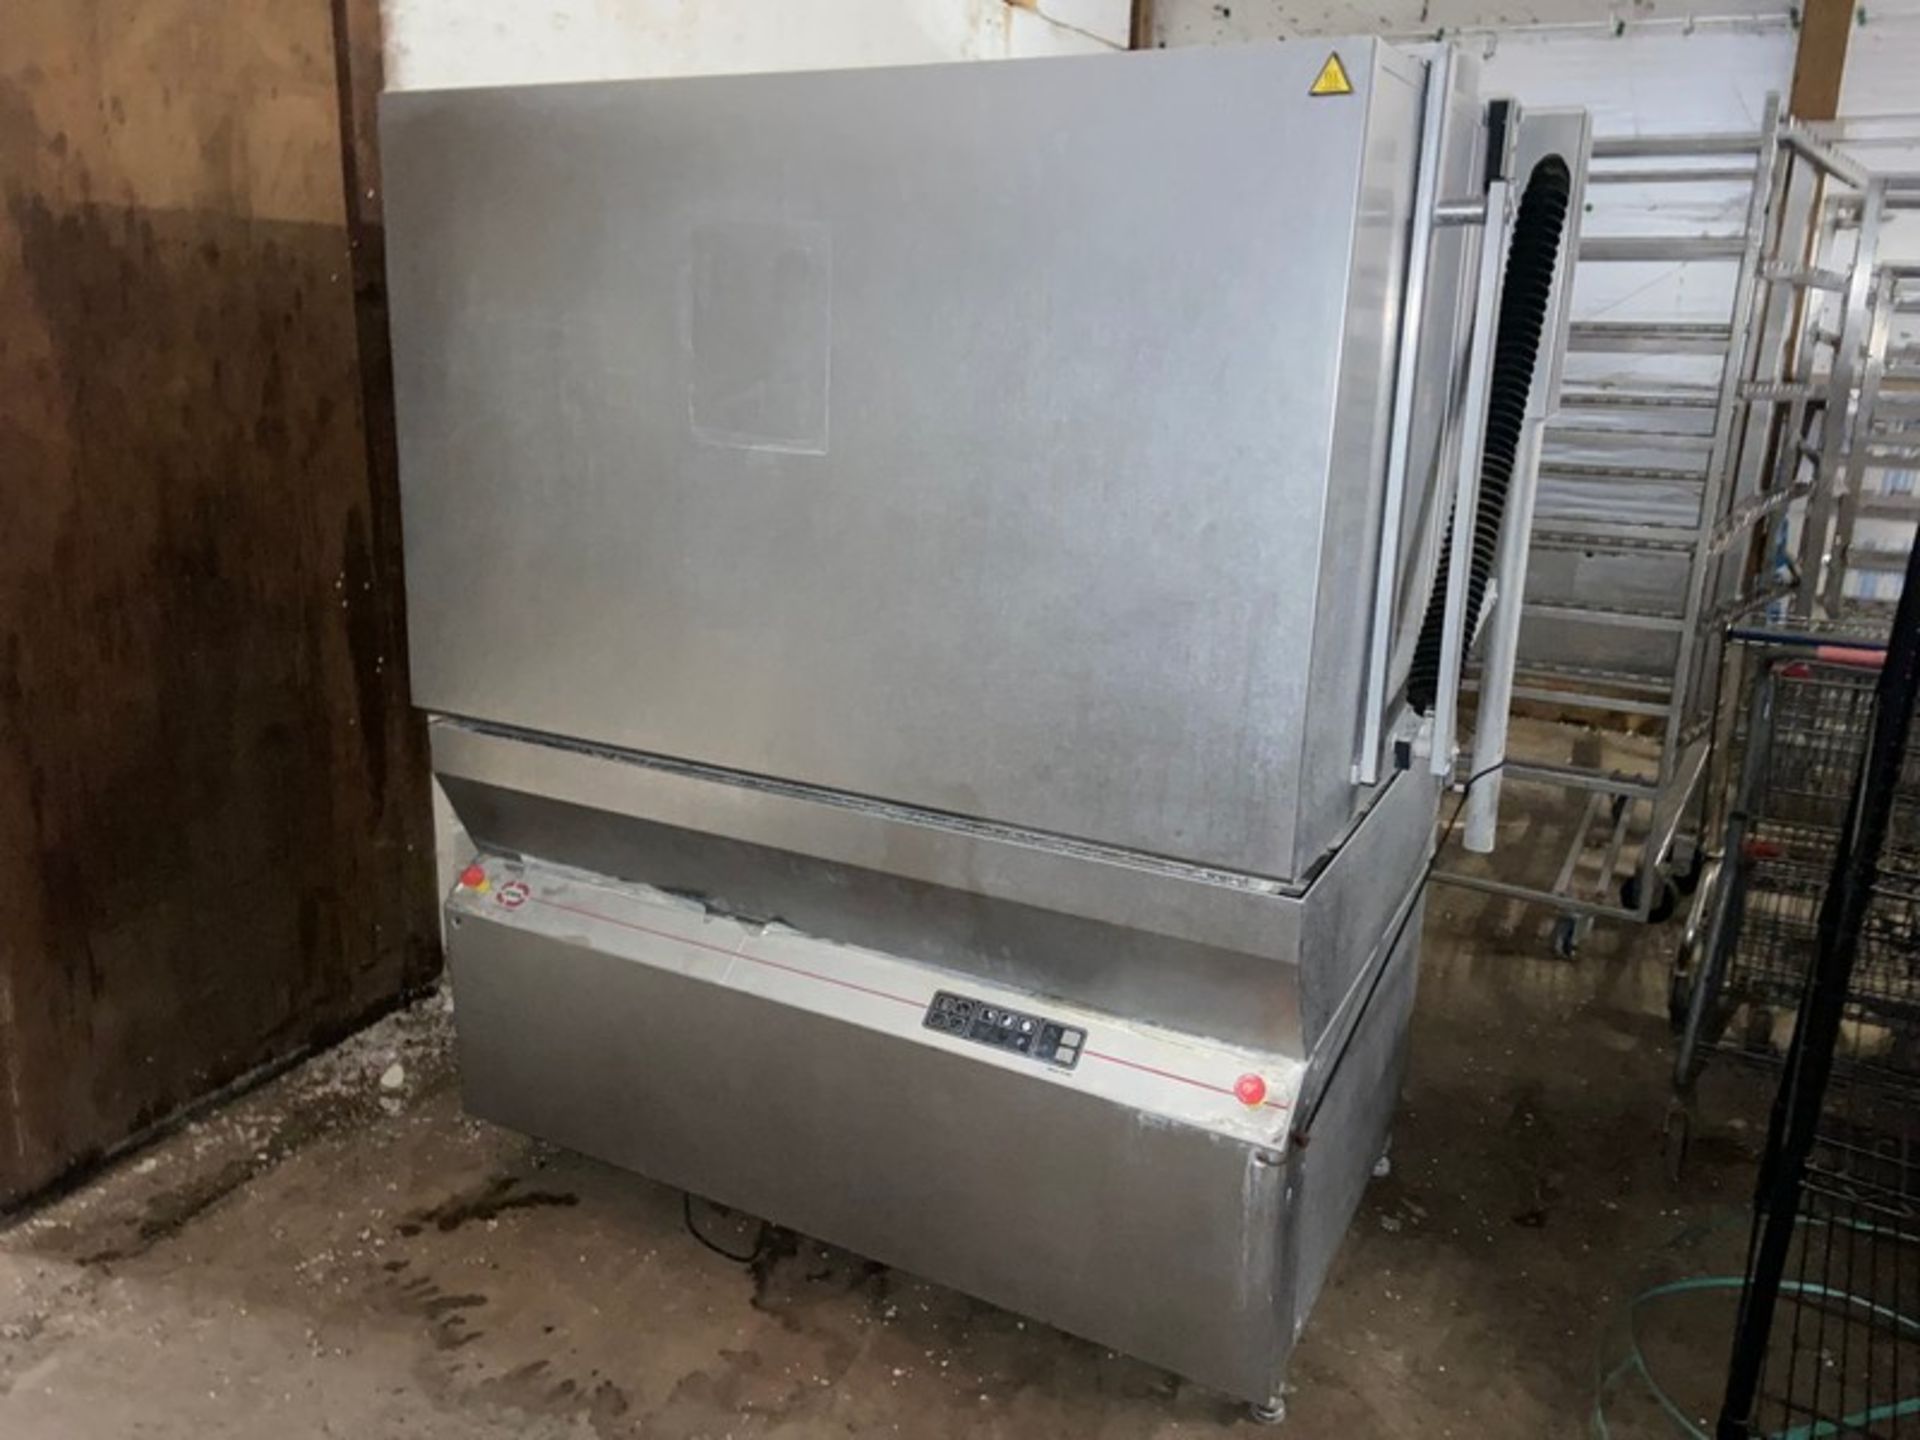 Jeros S/S Fully Automated Cleaning Machine (LOCATED IN LITTLESTOWN, PA)